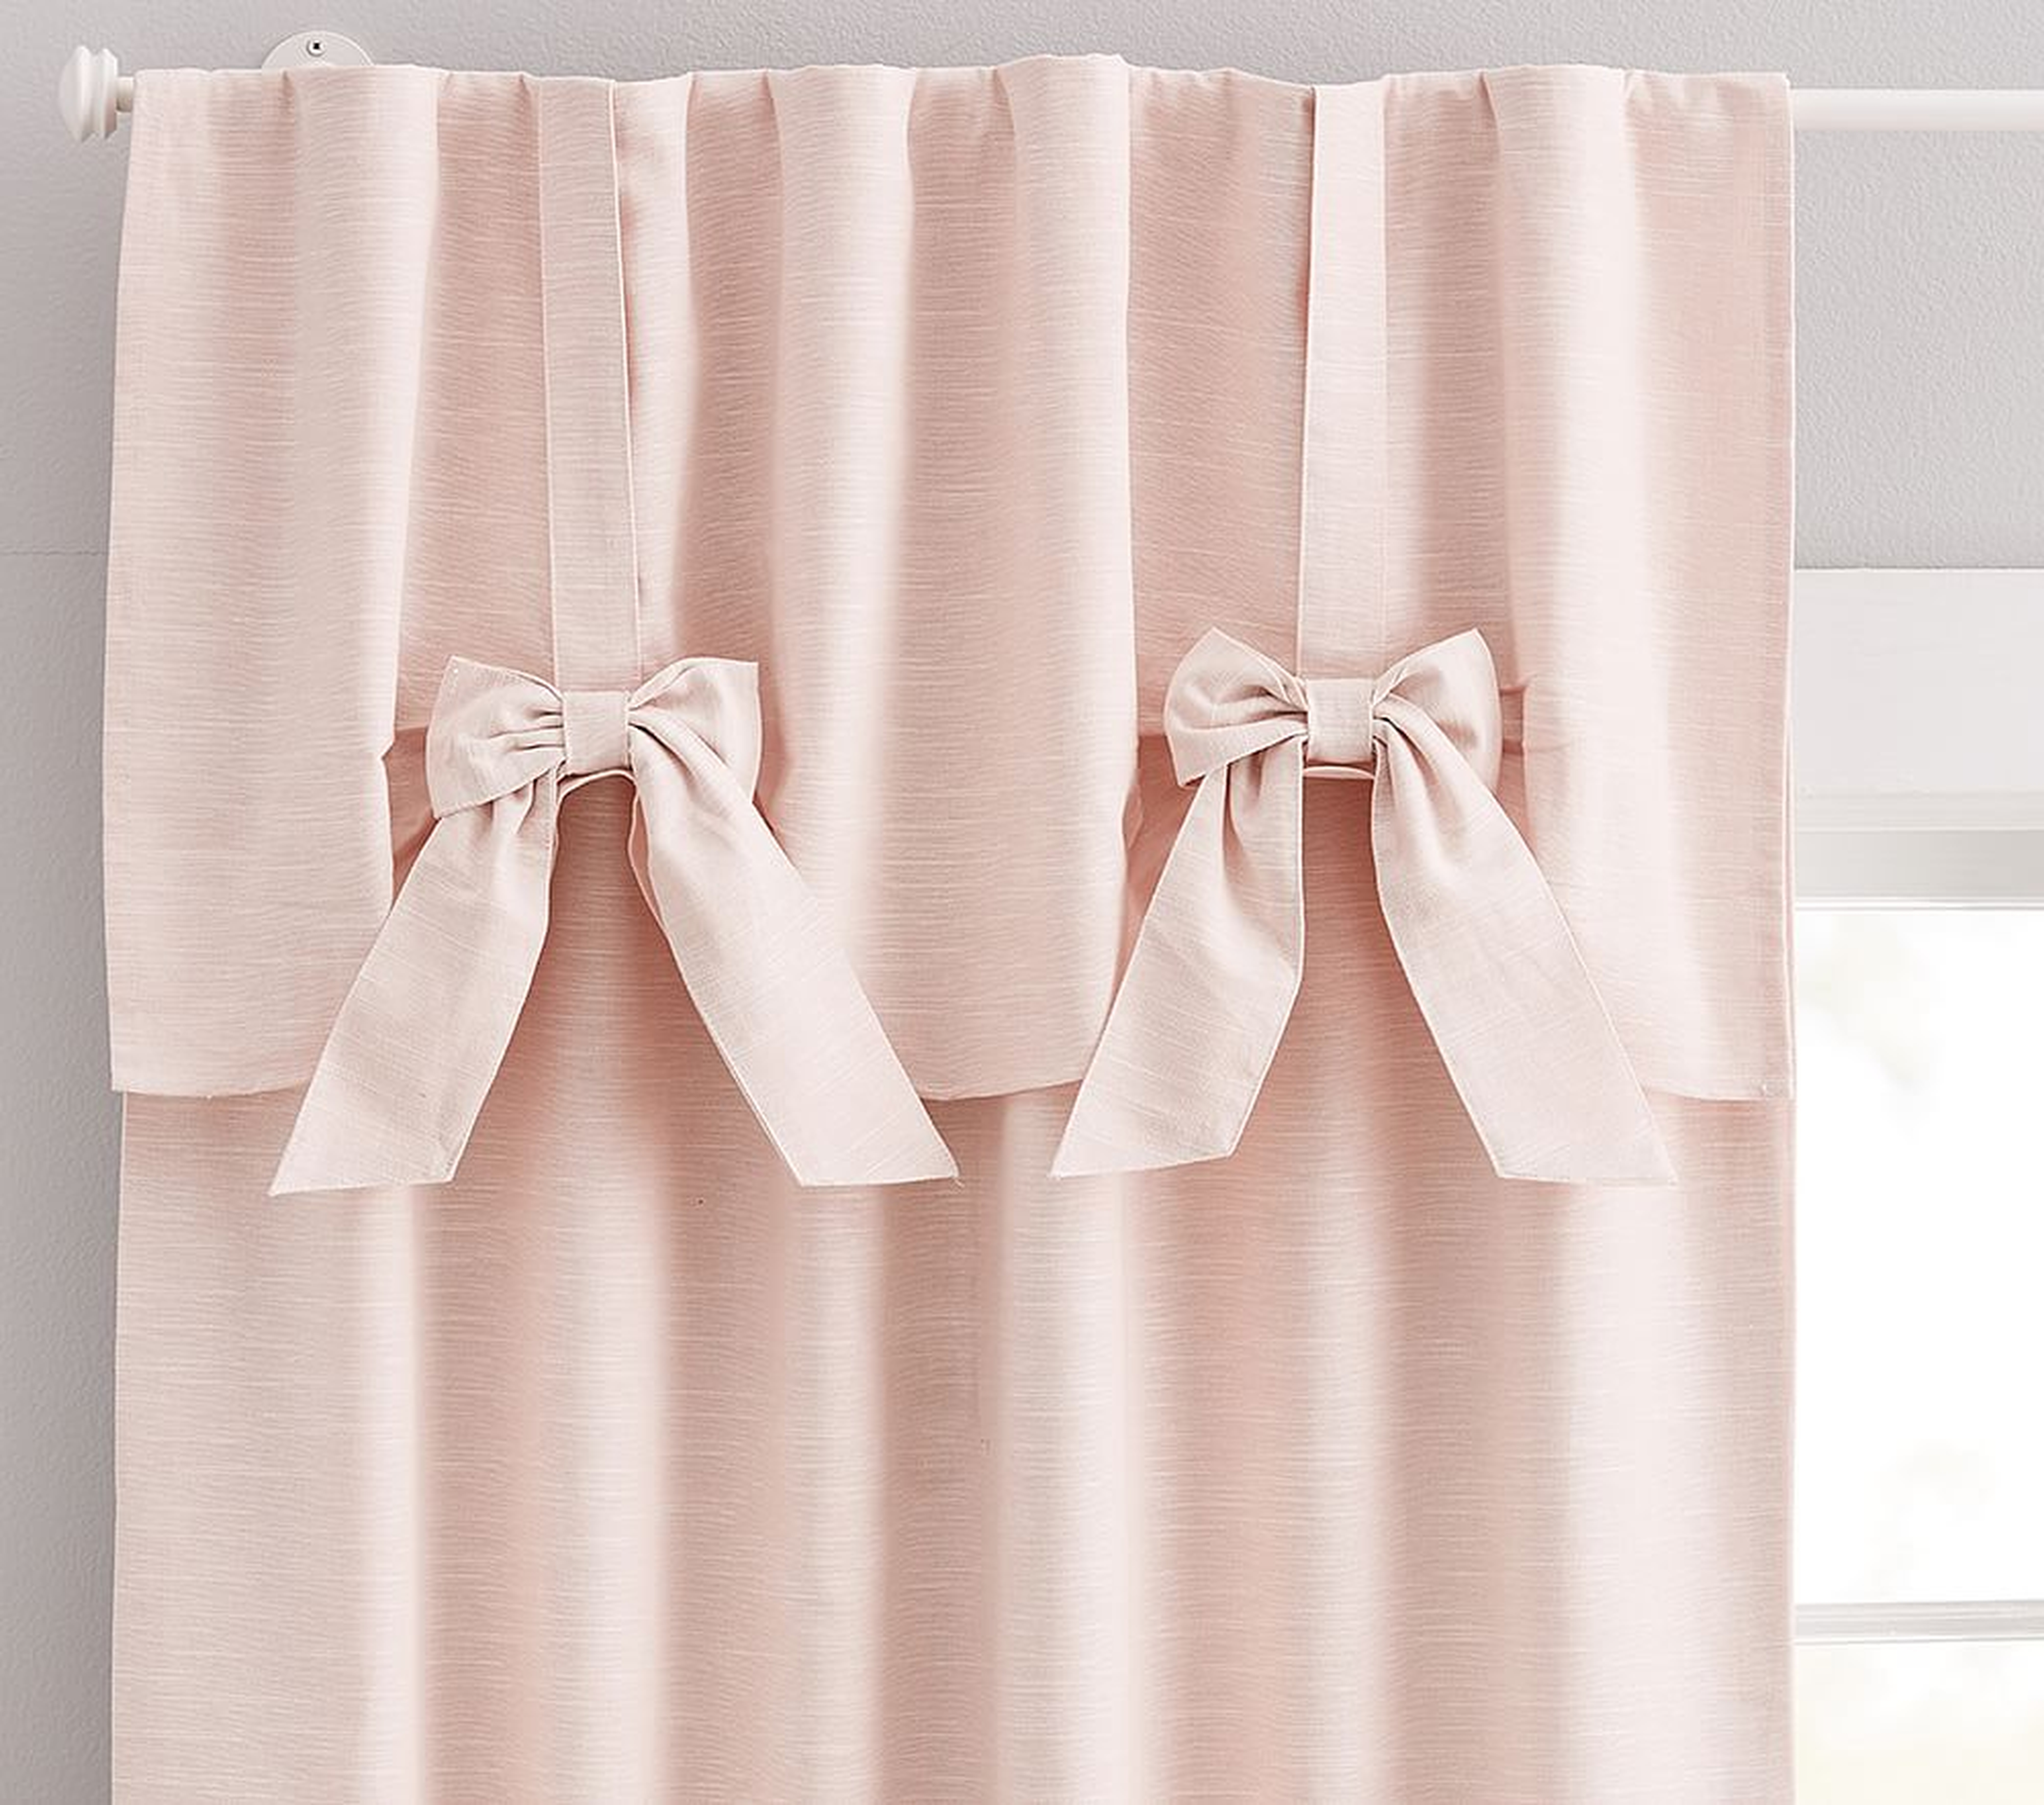 Evelyn Bow Valance Panel, 84 Inches, Blush, Set of 2 - Pottery Barn Kids